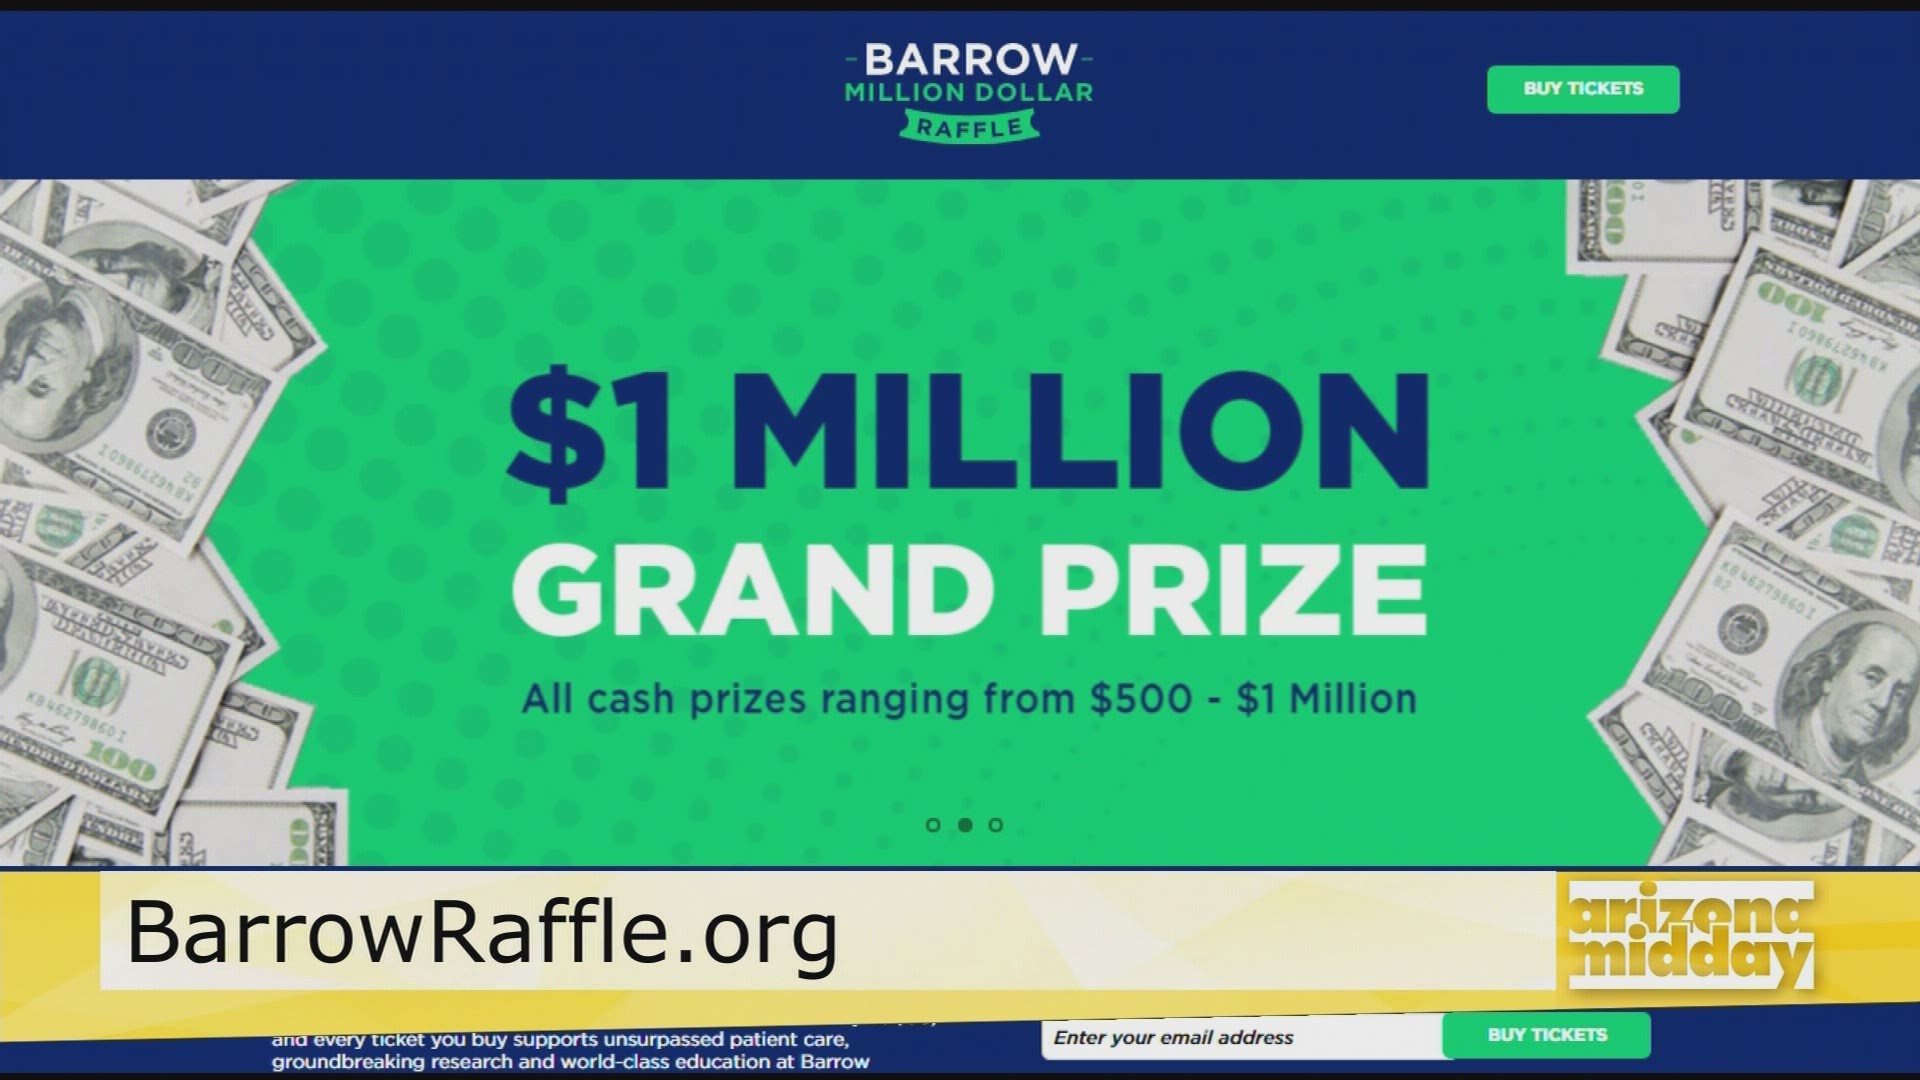 Dr. F. David Barranco with Barrow Neurological Institute, shares how we can help the community plus enter to win big with the Barrow Million Dollar Raffle